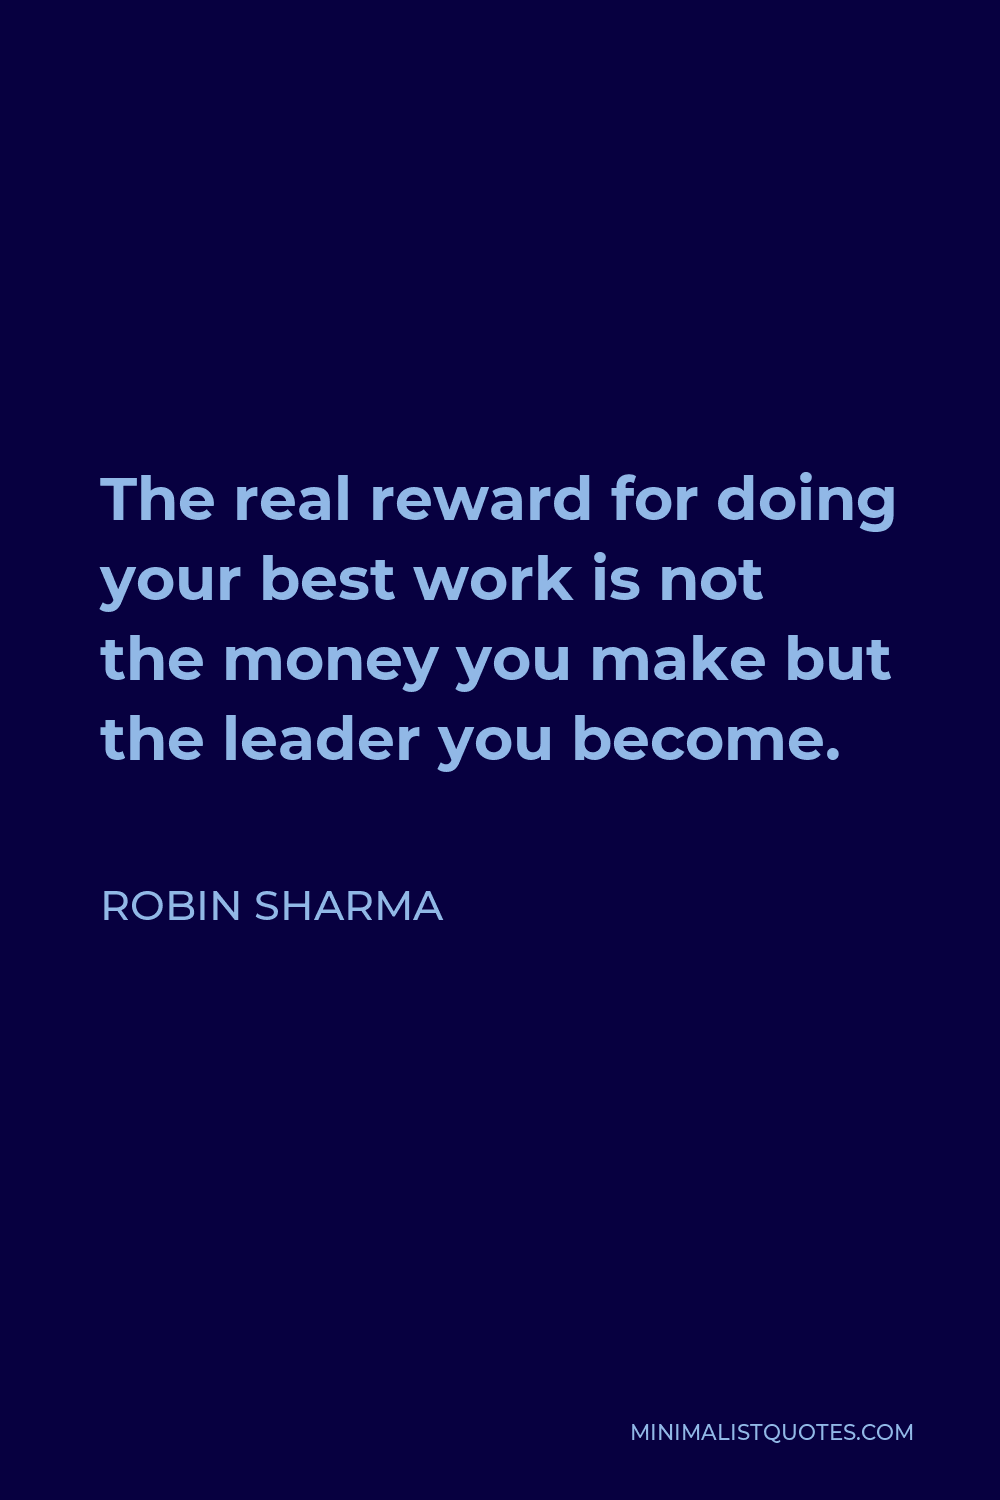 Robin Sharma Quote - The real reward for doing your best work is not the money you make but the leader you become.